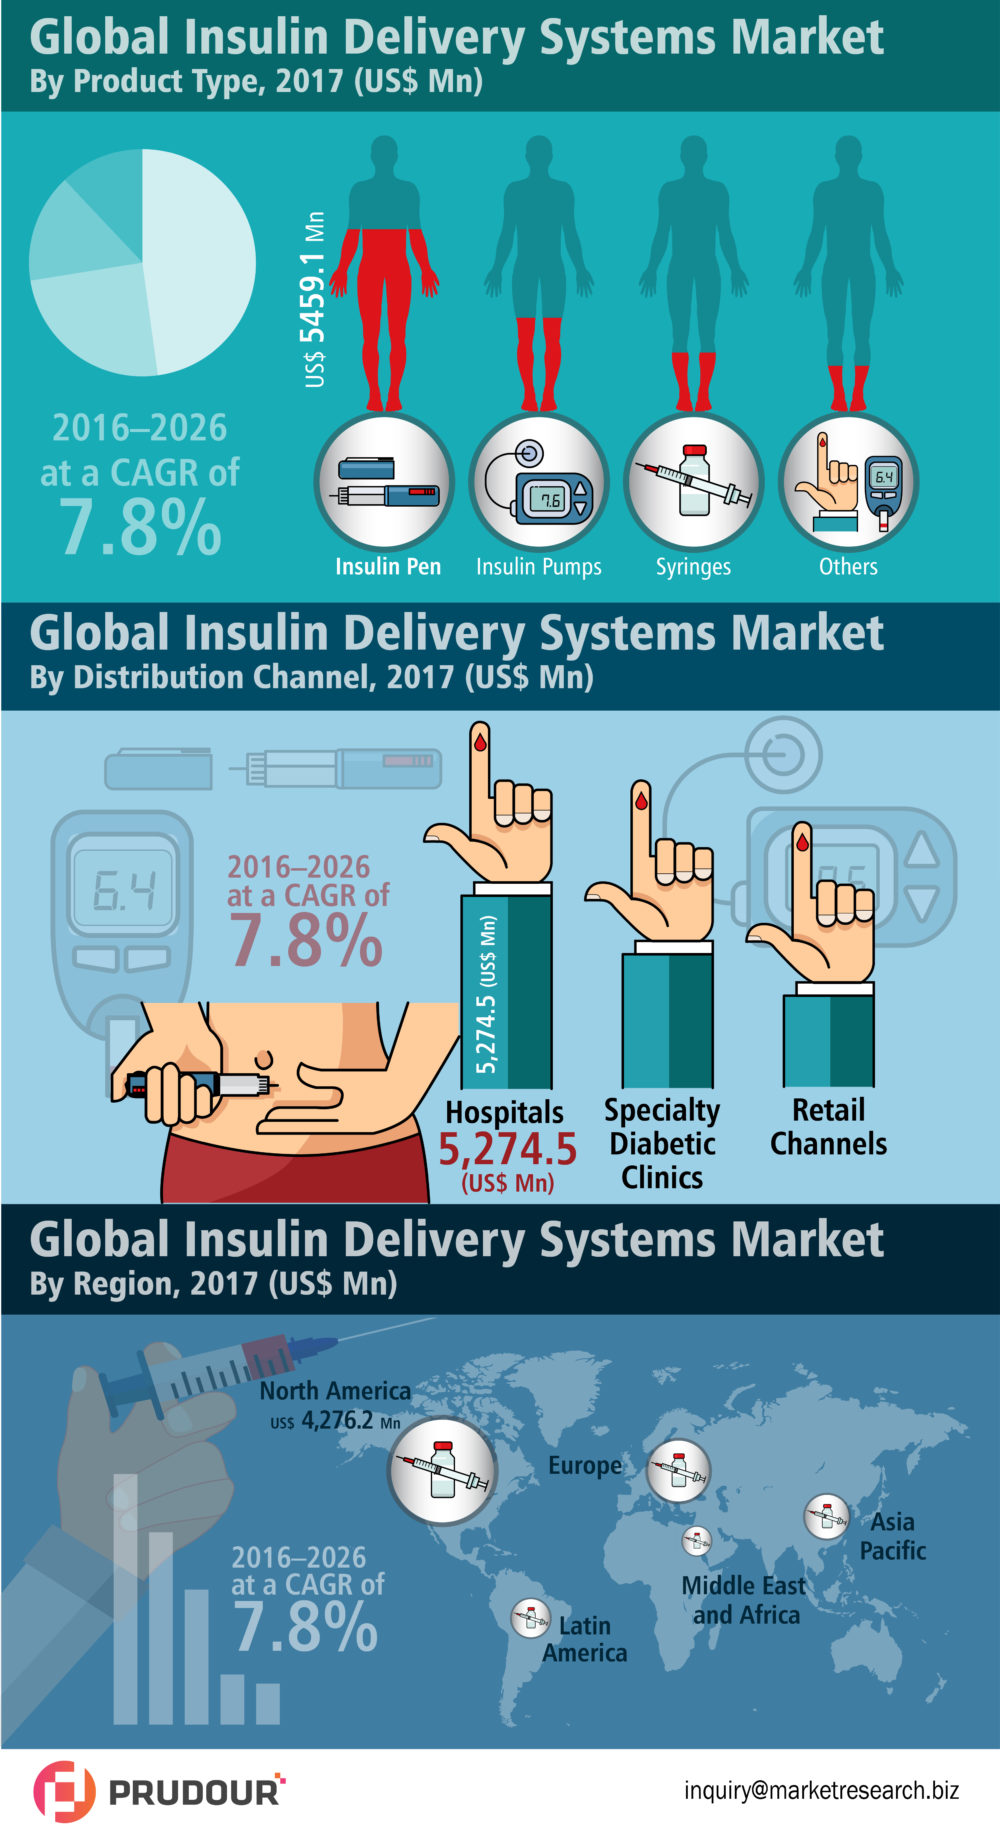 CAGR Of 7 %: Global Insulin Delivery System Market projected CAGR of 7 % from 2017 to 2026